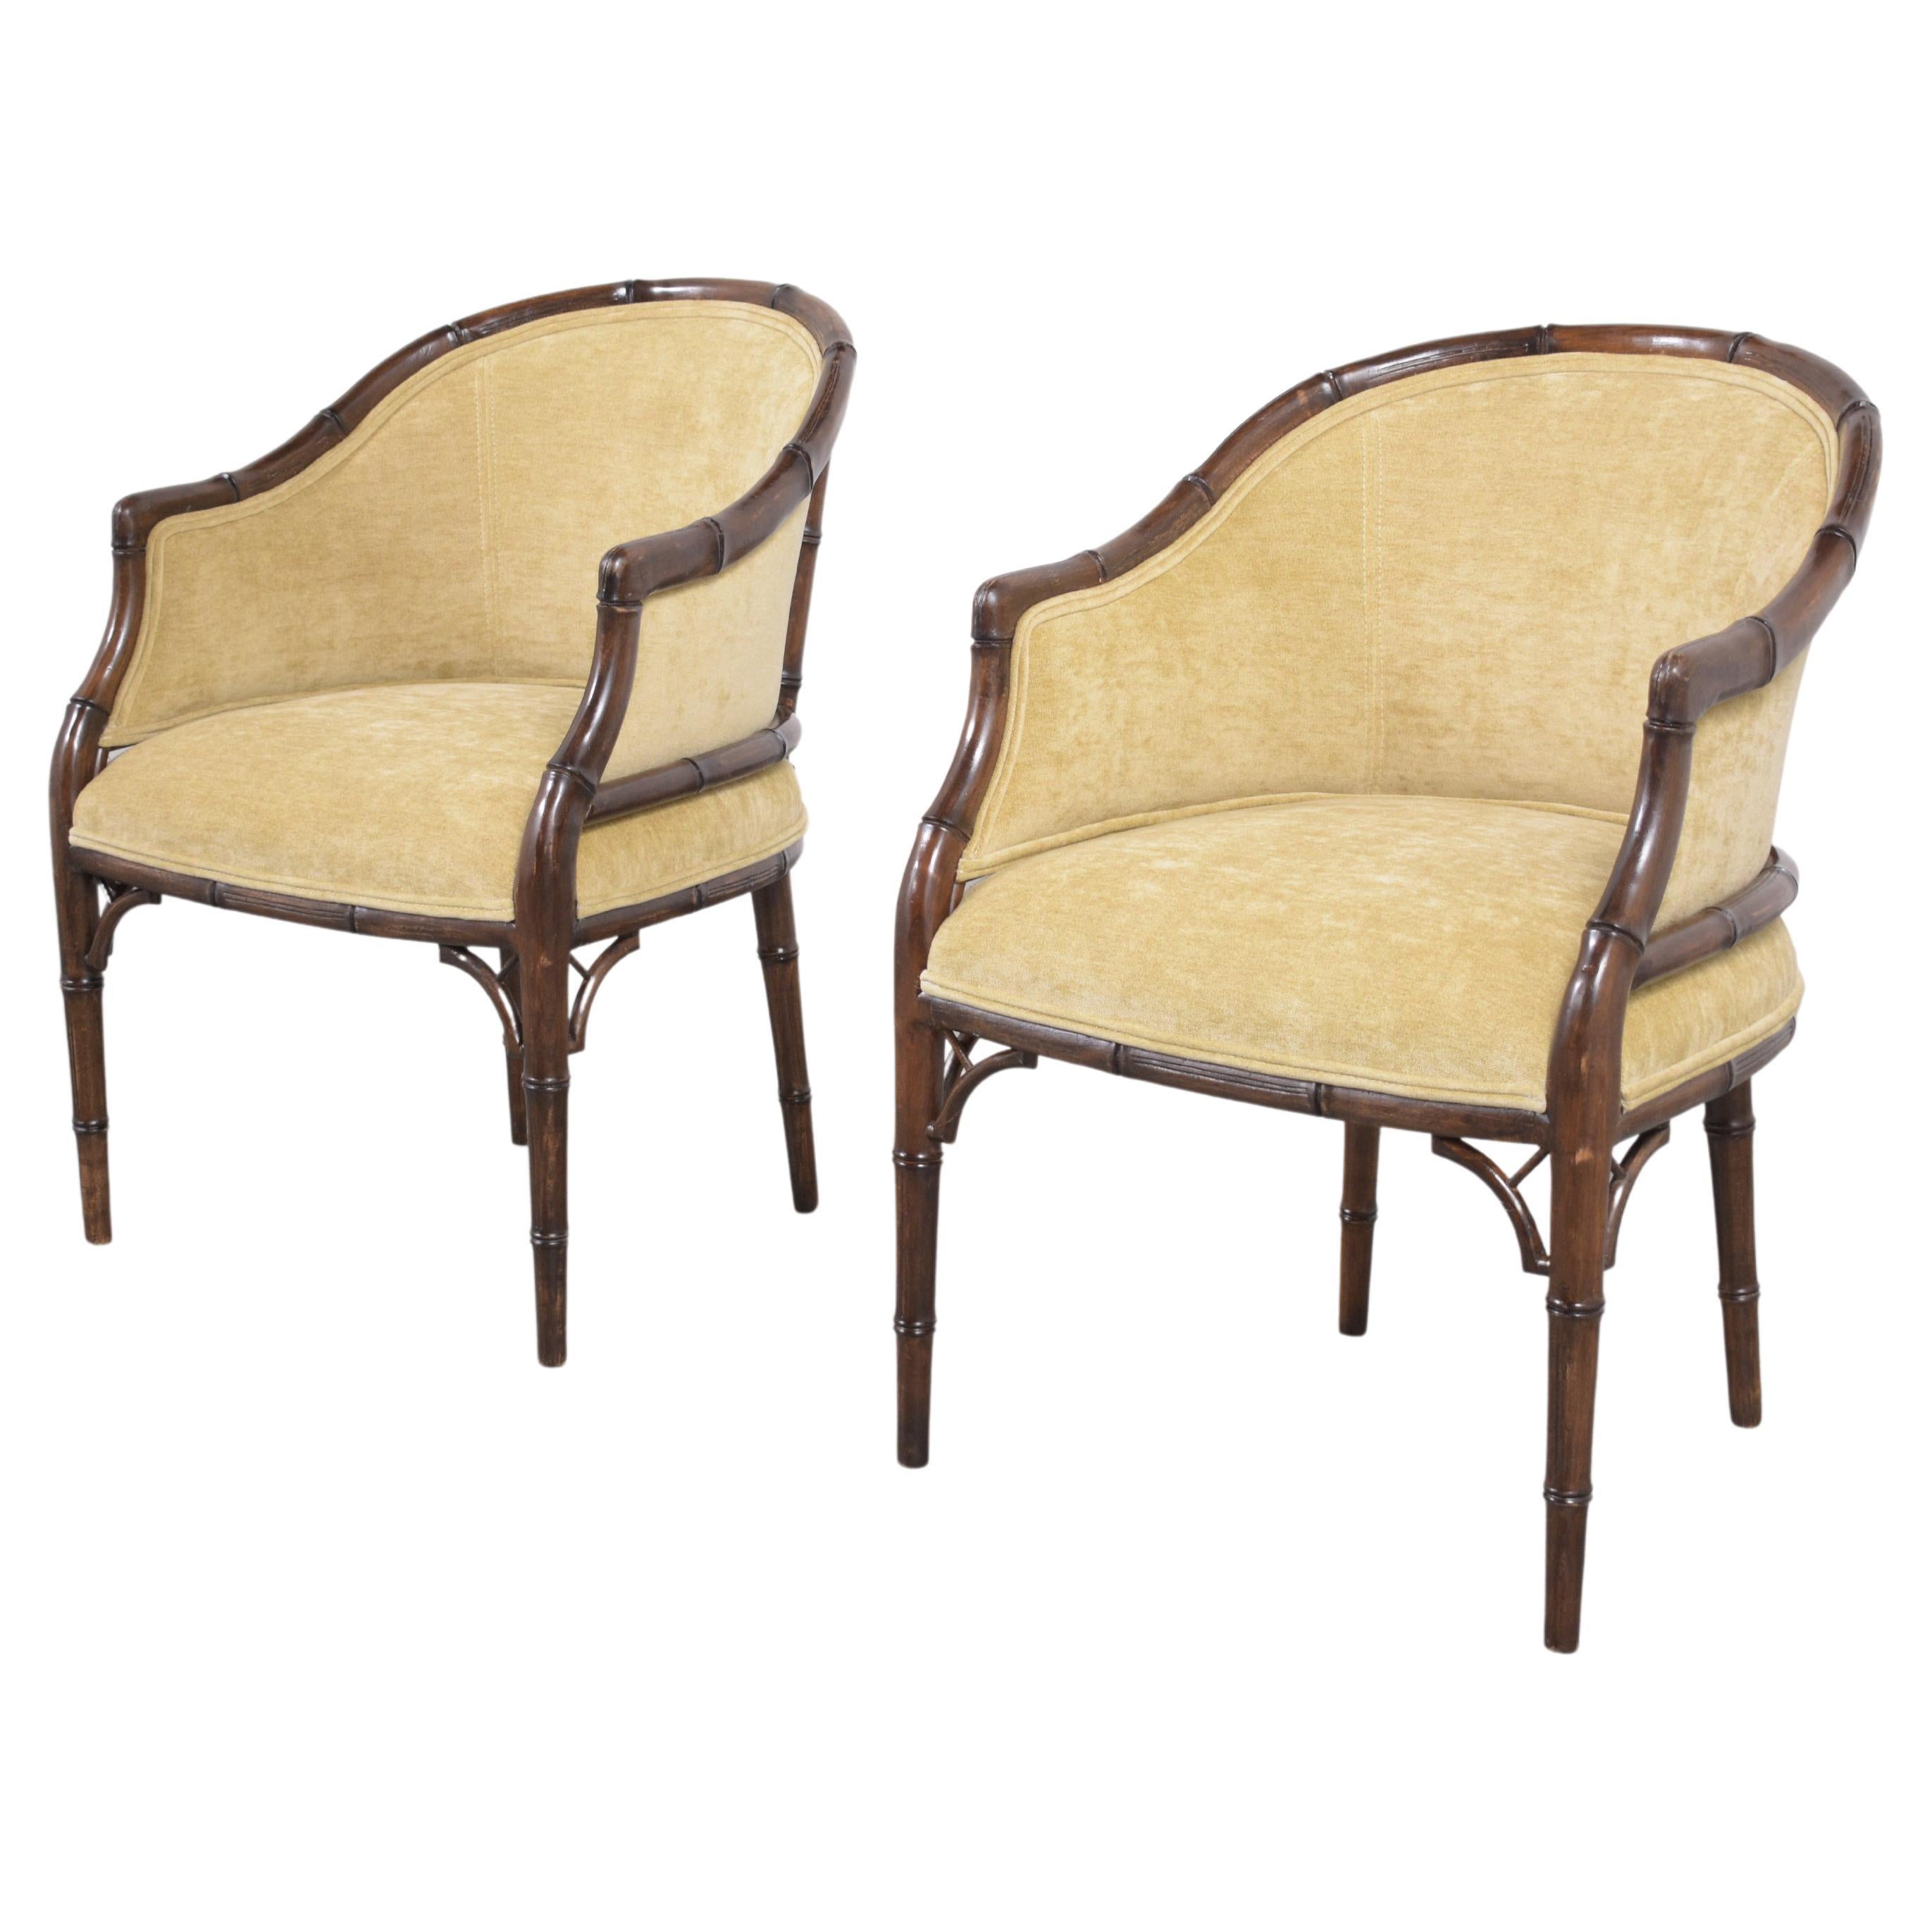 Embrace the glamour of the golden era with our handpicked pair of Hollywood Regency armchairs. Crafted with precision from high-quality wood, each chair stands as a testament to impeccable craftsmanship and timeless design. Having undergone a